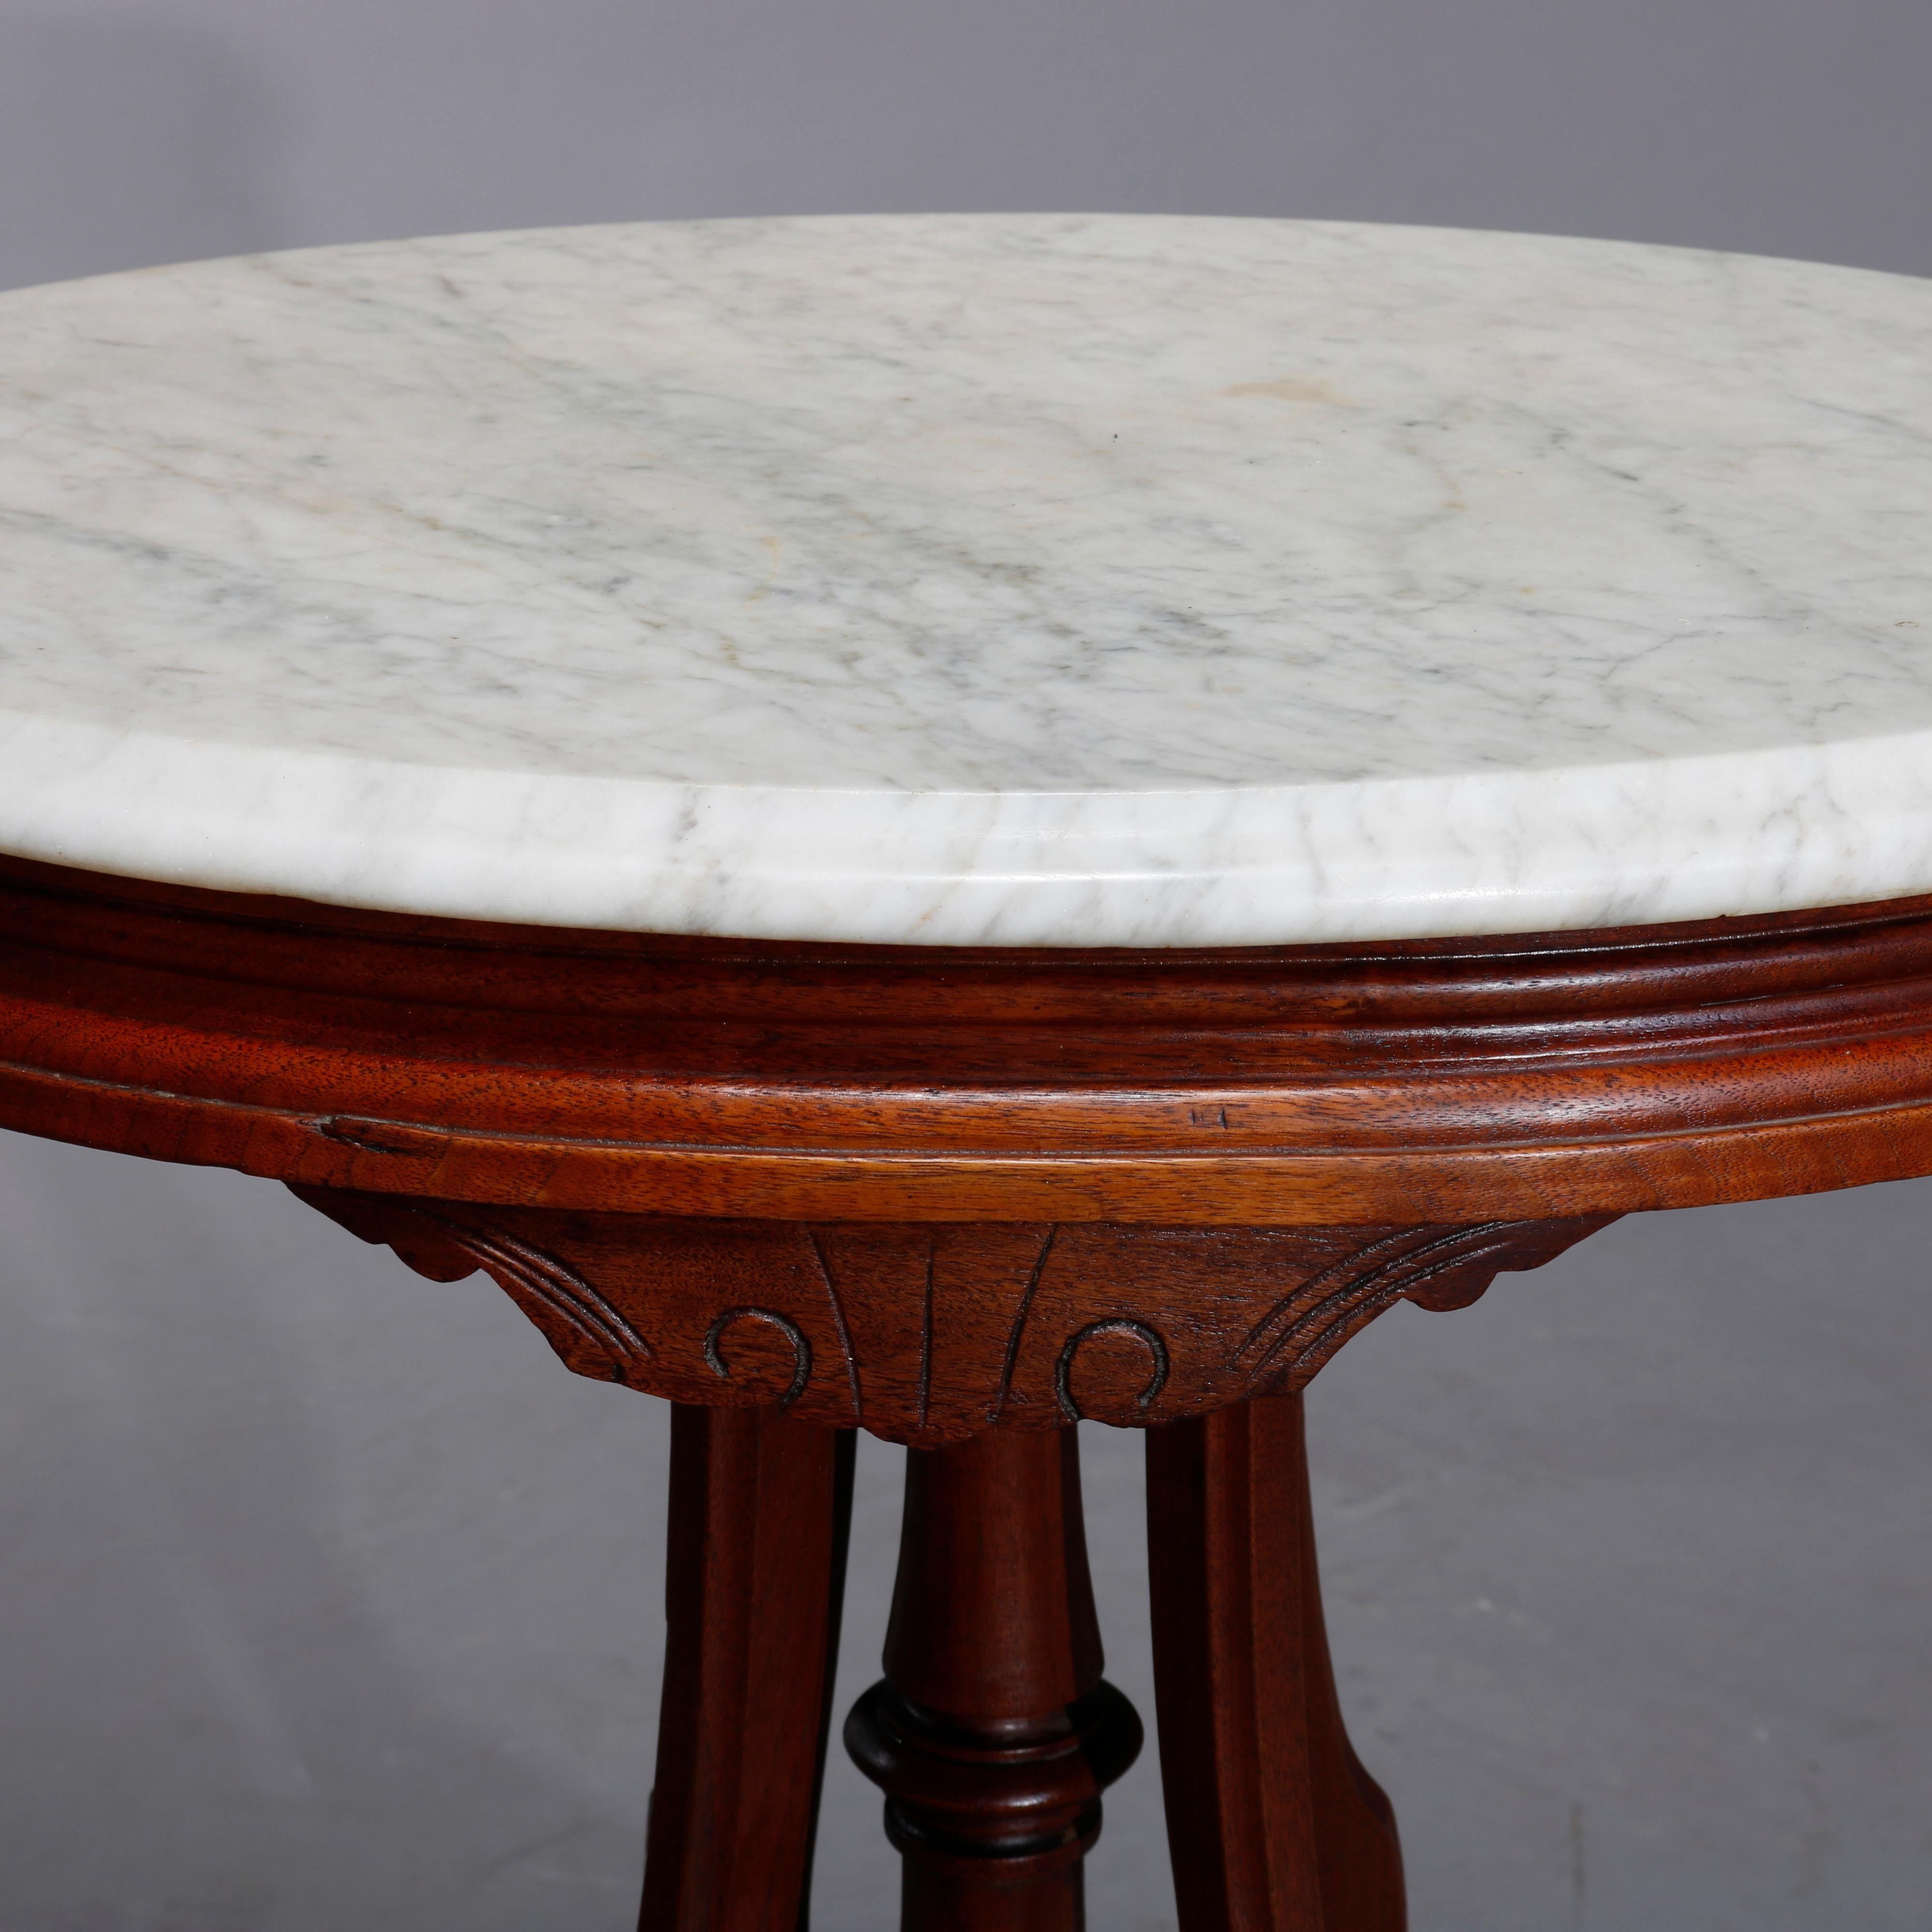 An antique Renaissance Revival side table offers oval form with beveled marble top surmounting carved walnut base having skirt with scroll incised element raised on cabriole legs with central turned column, c1890

Measures: 29.5